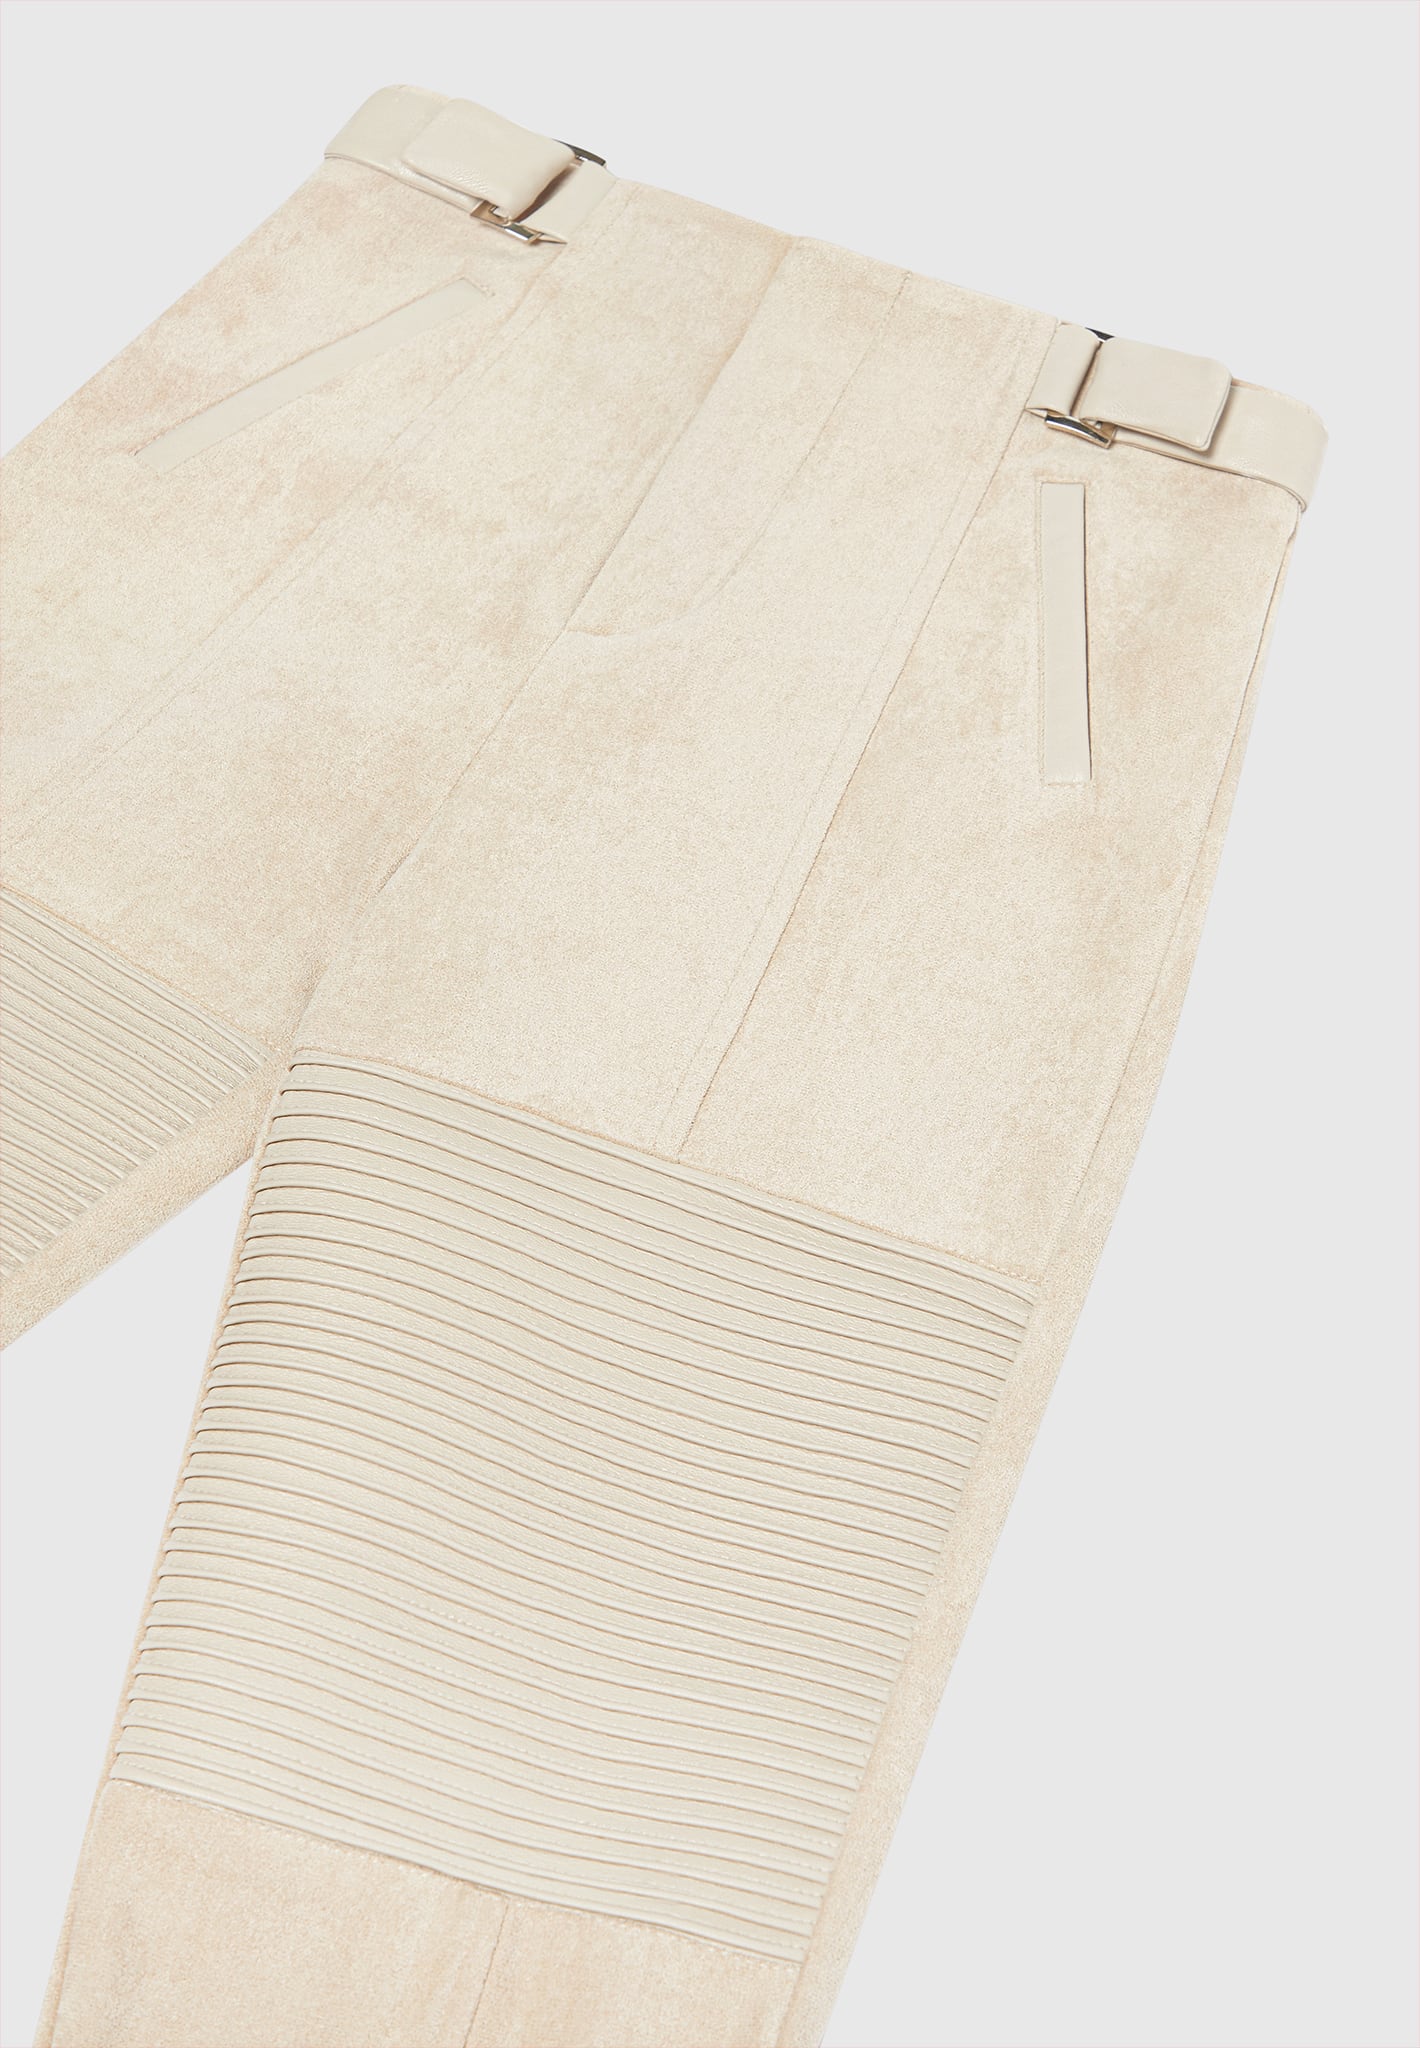 vegan-leather-and-suede-ribbed-leggings-beige